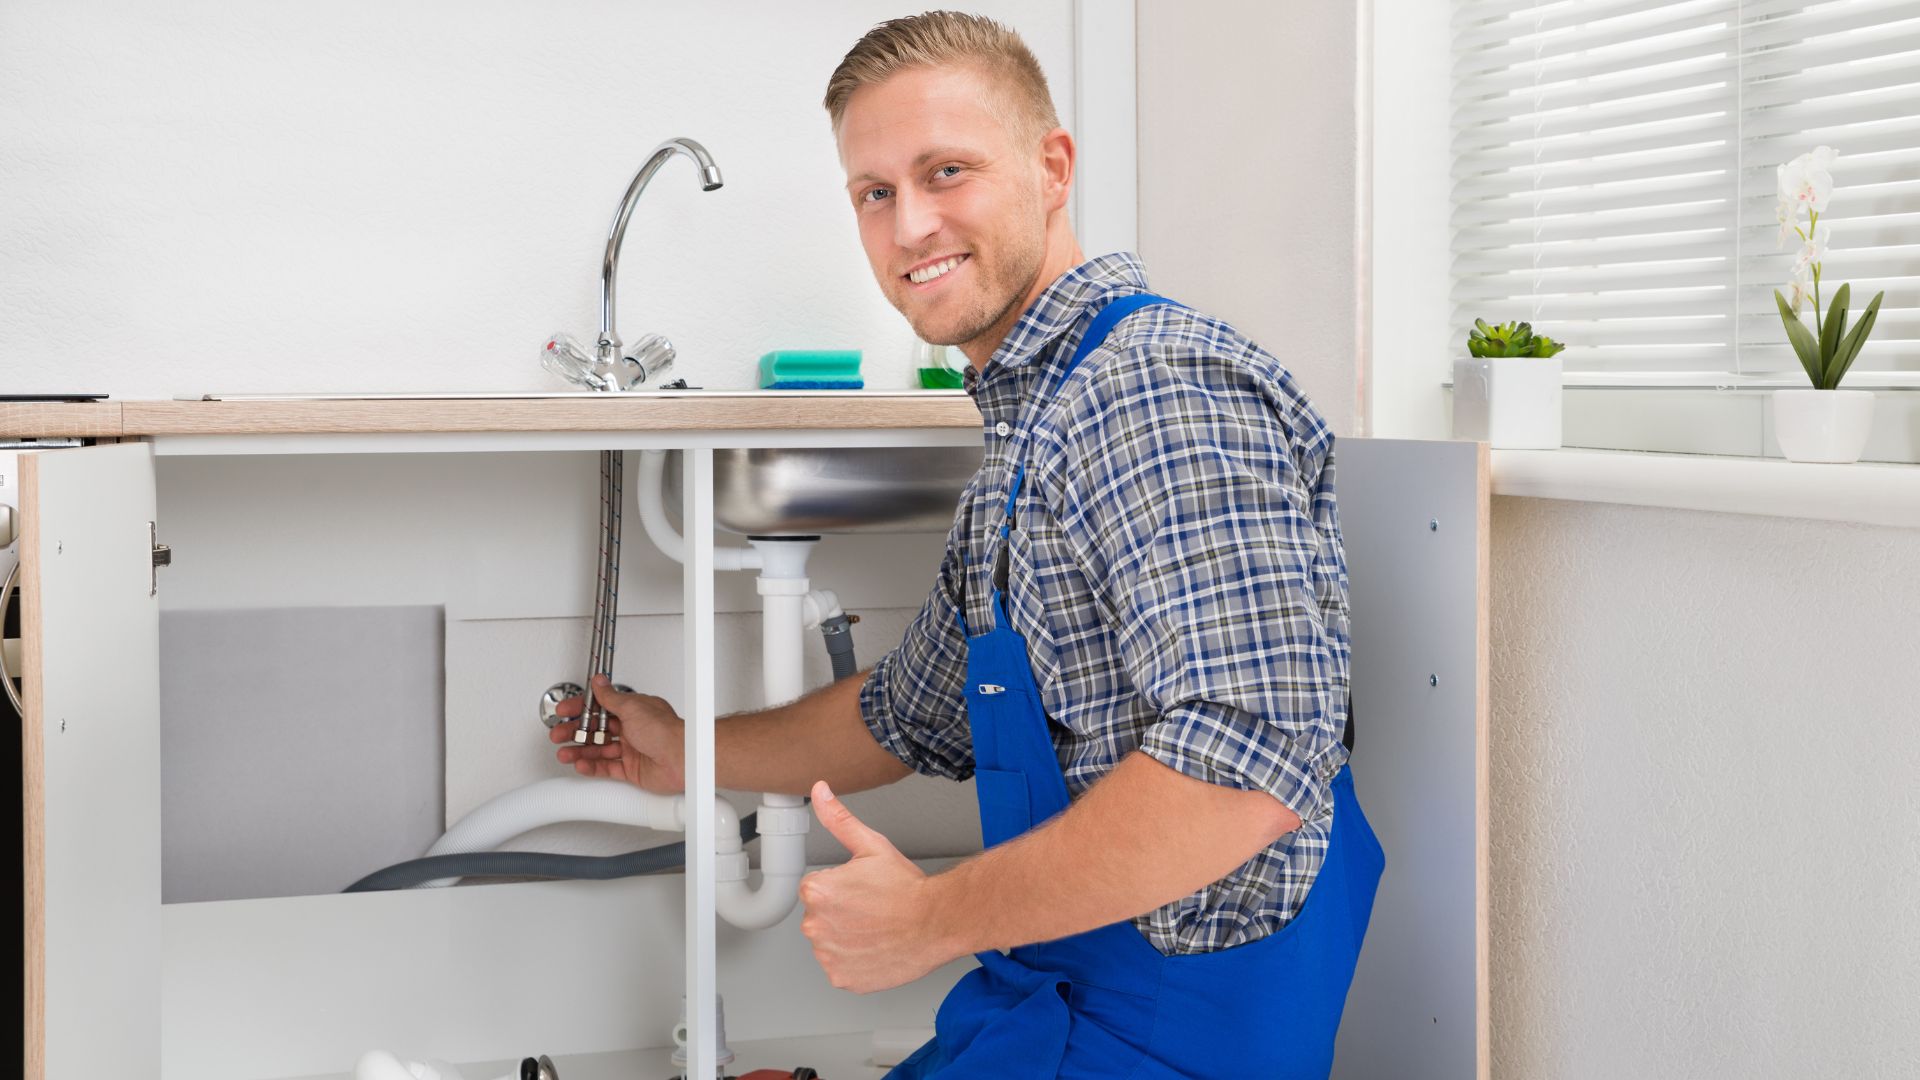 Plumbing Fixtures: Faucet and Under-Sink Filtration Systems